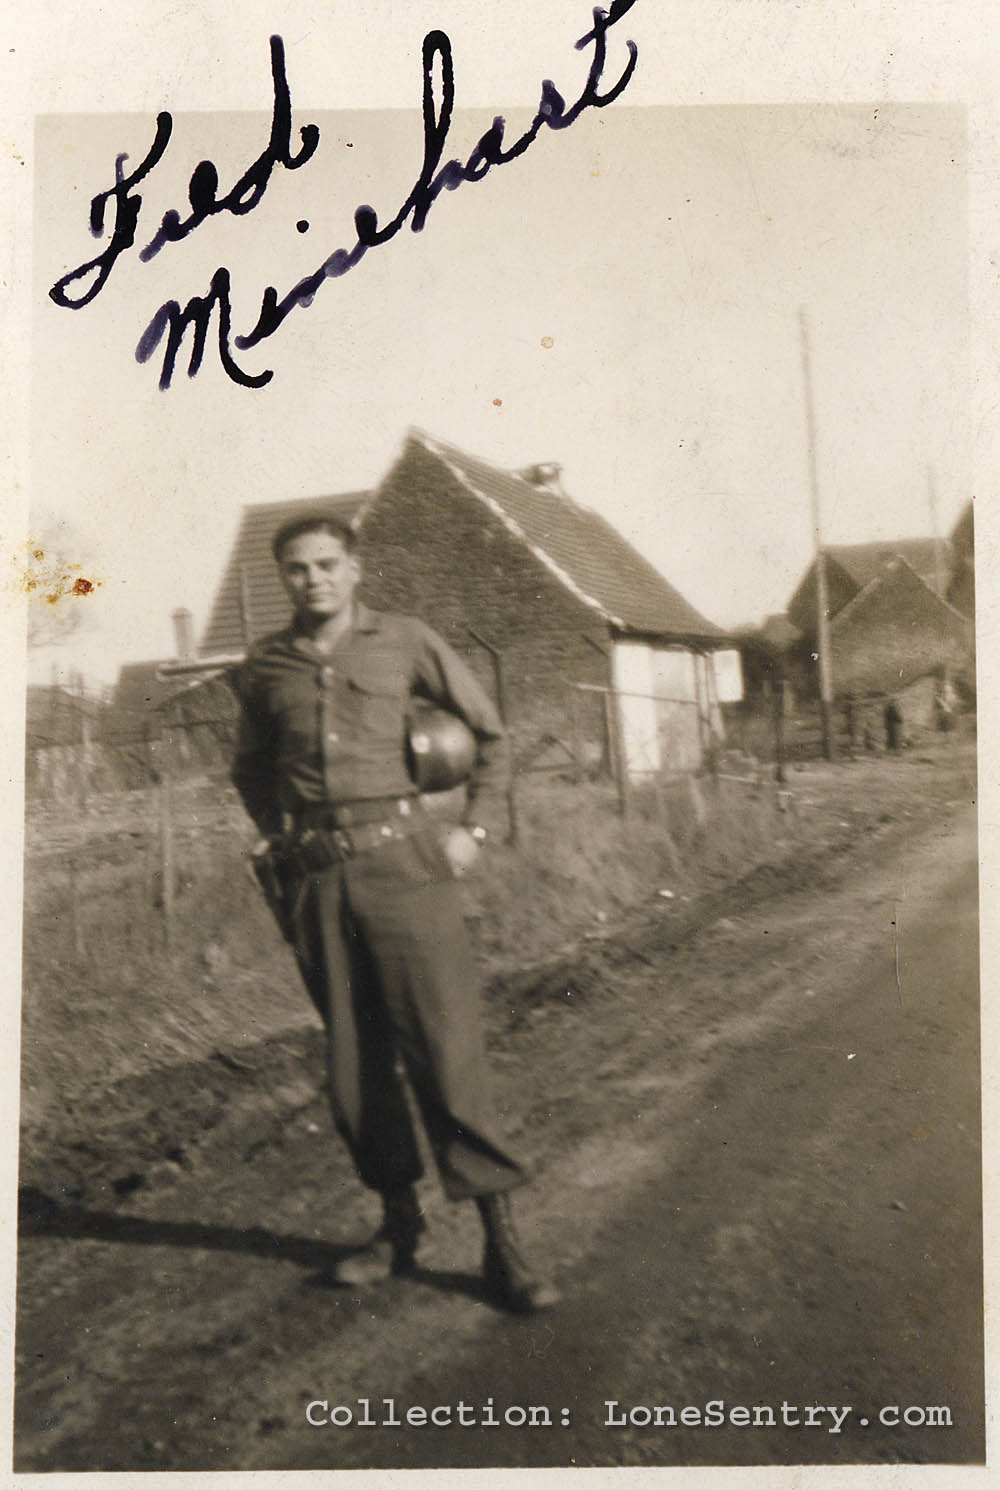 Photograph of Fred Minehart of the 995th Field Artillery Battalion taken in Alsace in February 1945. (Collection LoneSentry.com)